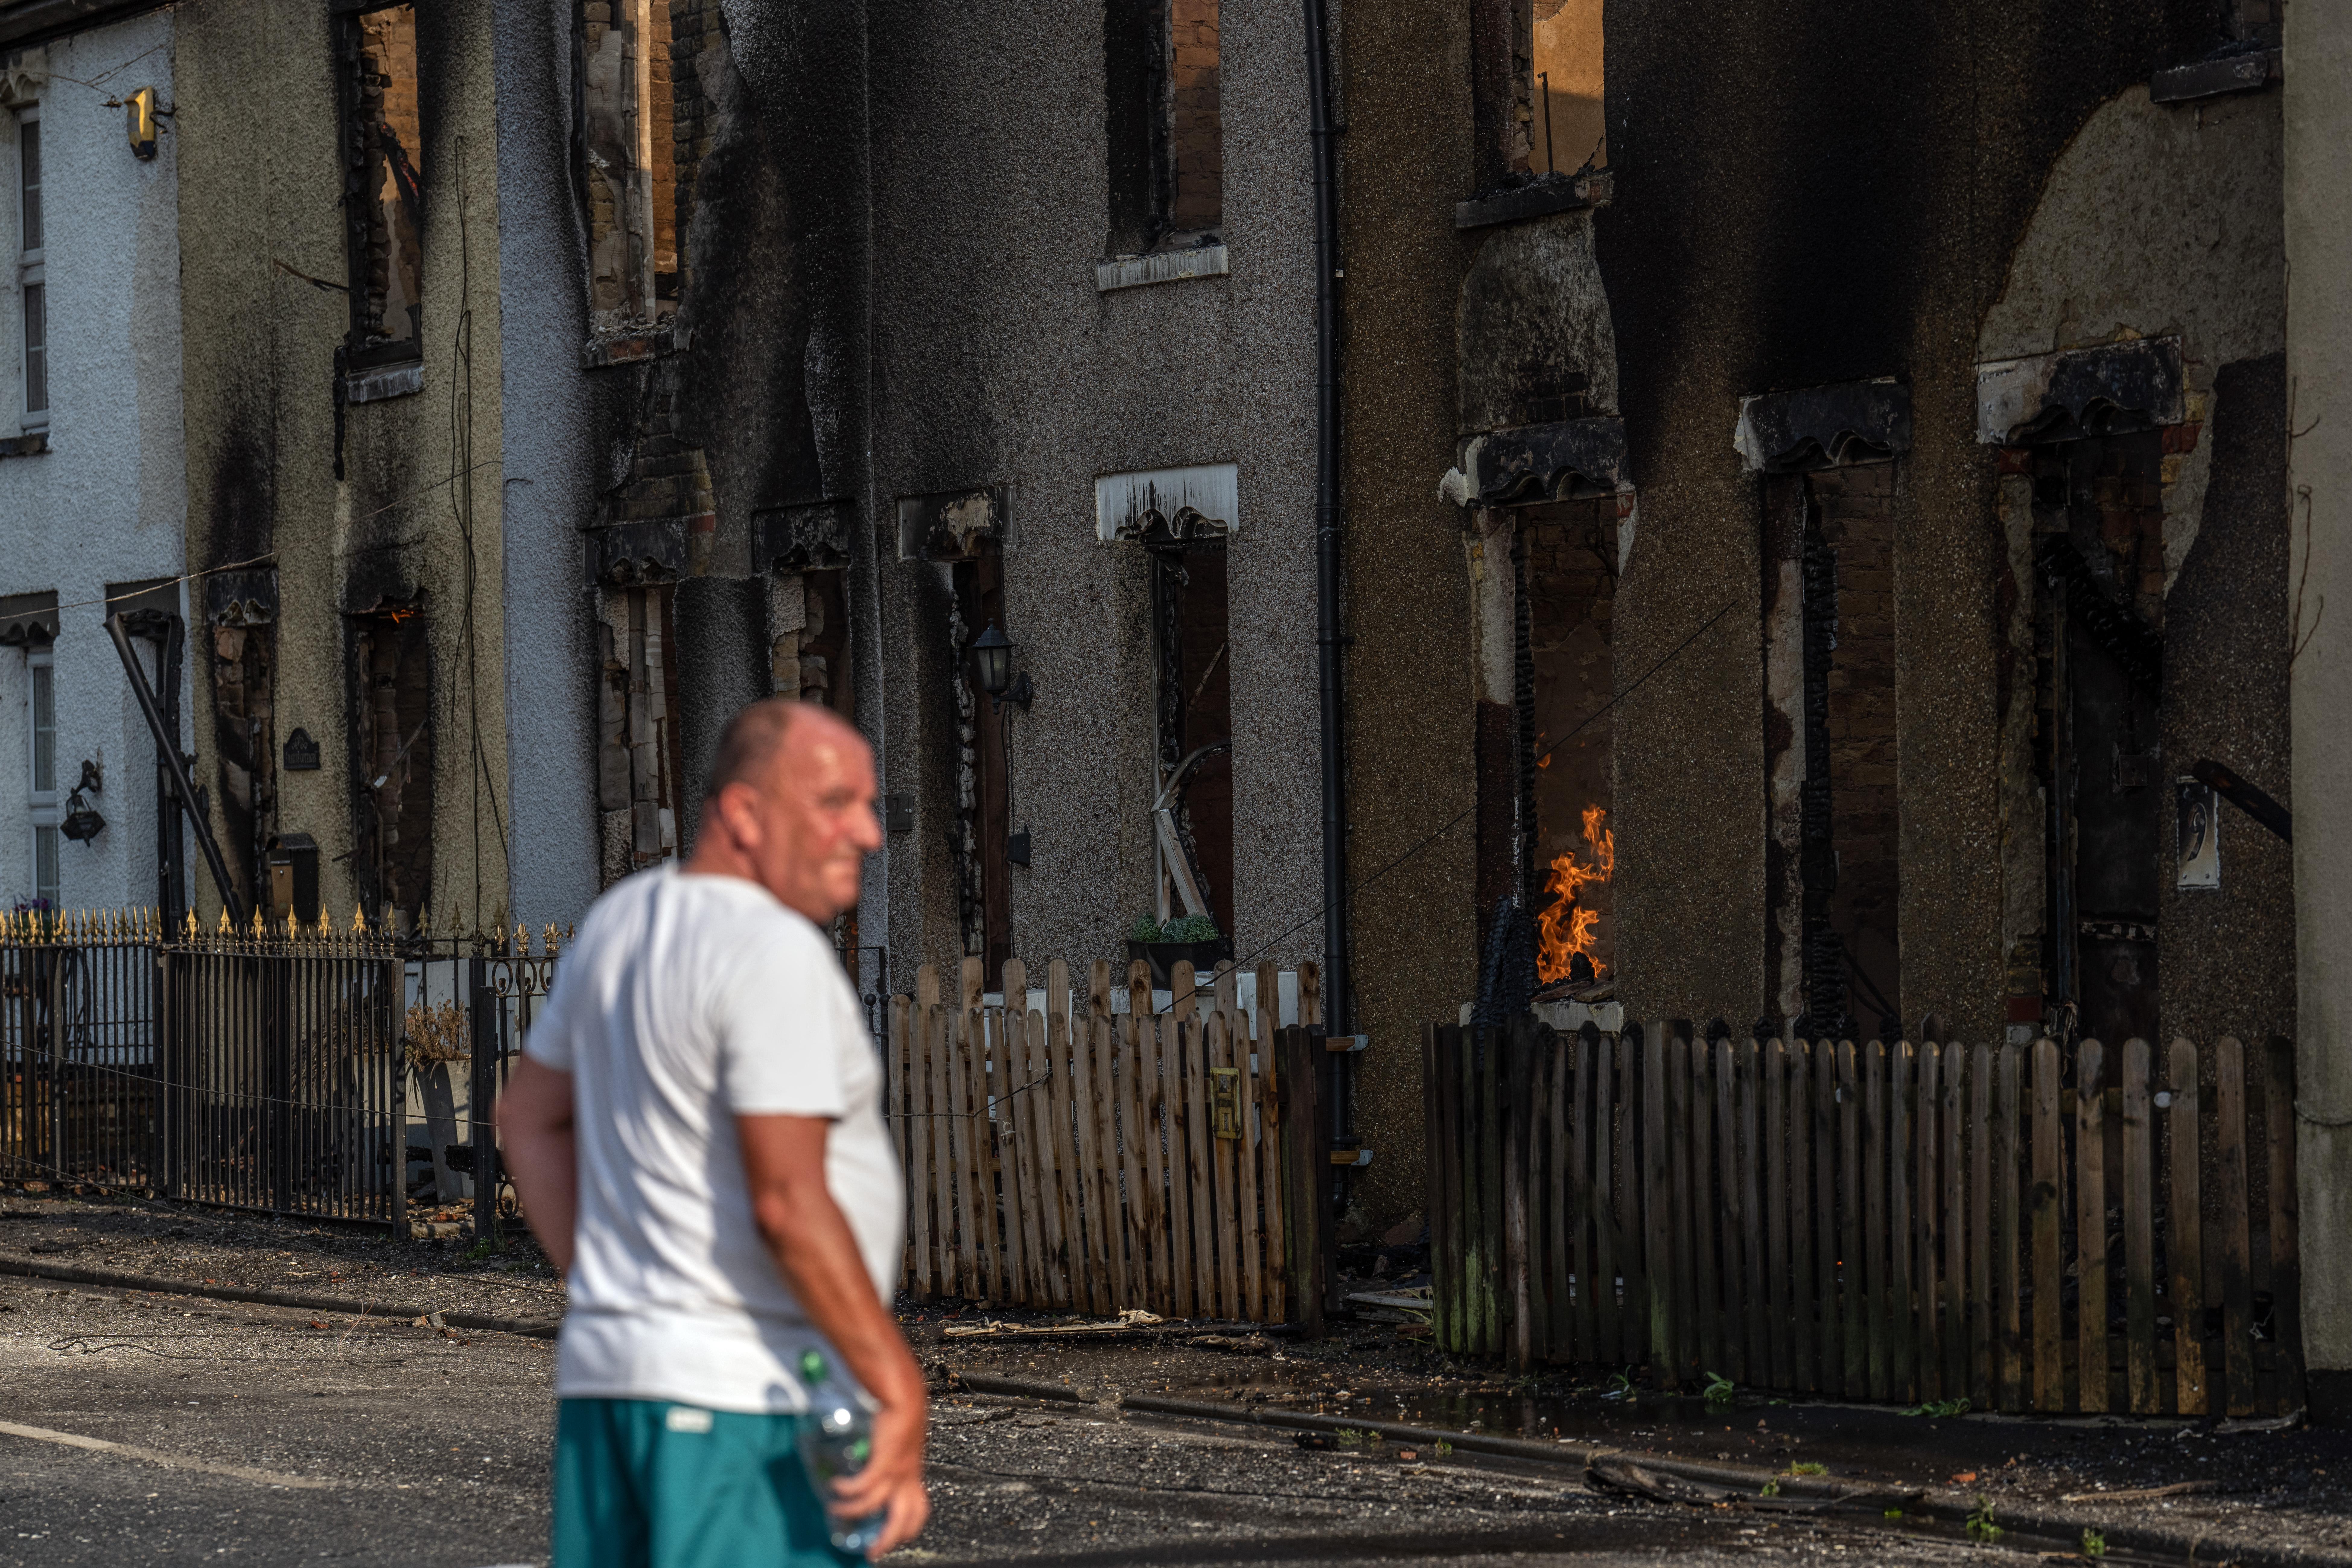 WENNINGTON, GREATER LONDON - JULY 19: A local resident pauses works next to building destroyed by fire on July 19, 2022 in Wennington, England. A series of grass fires broke out around the British capital amid an intense heatwave. (Photo by Carl Court/Getty Images)